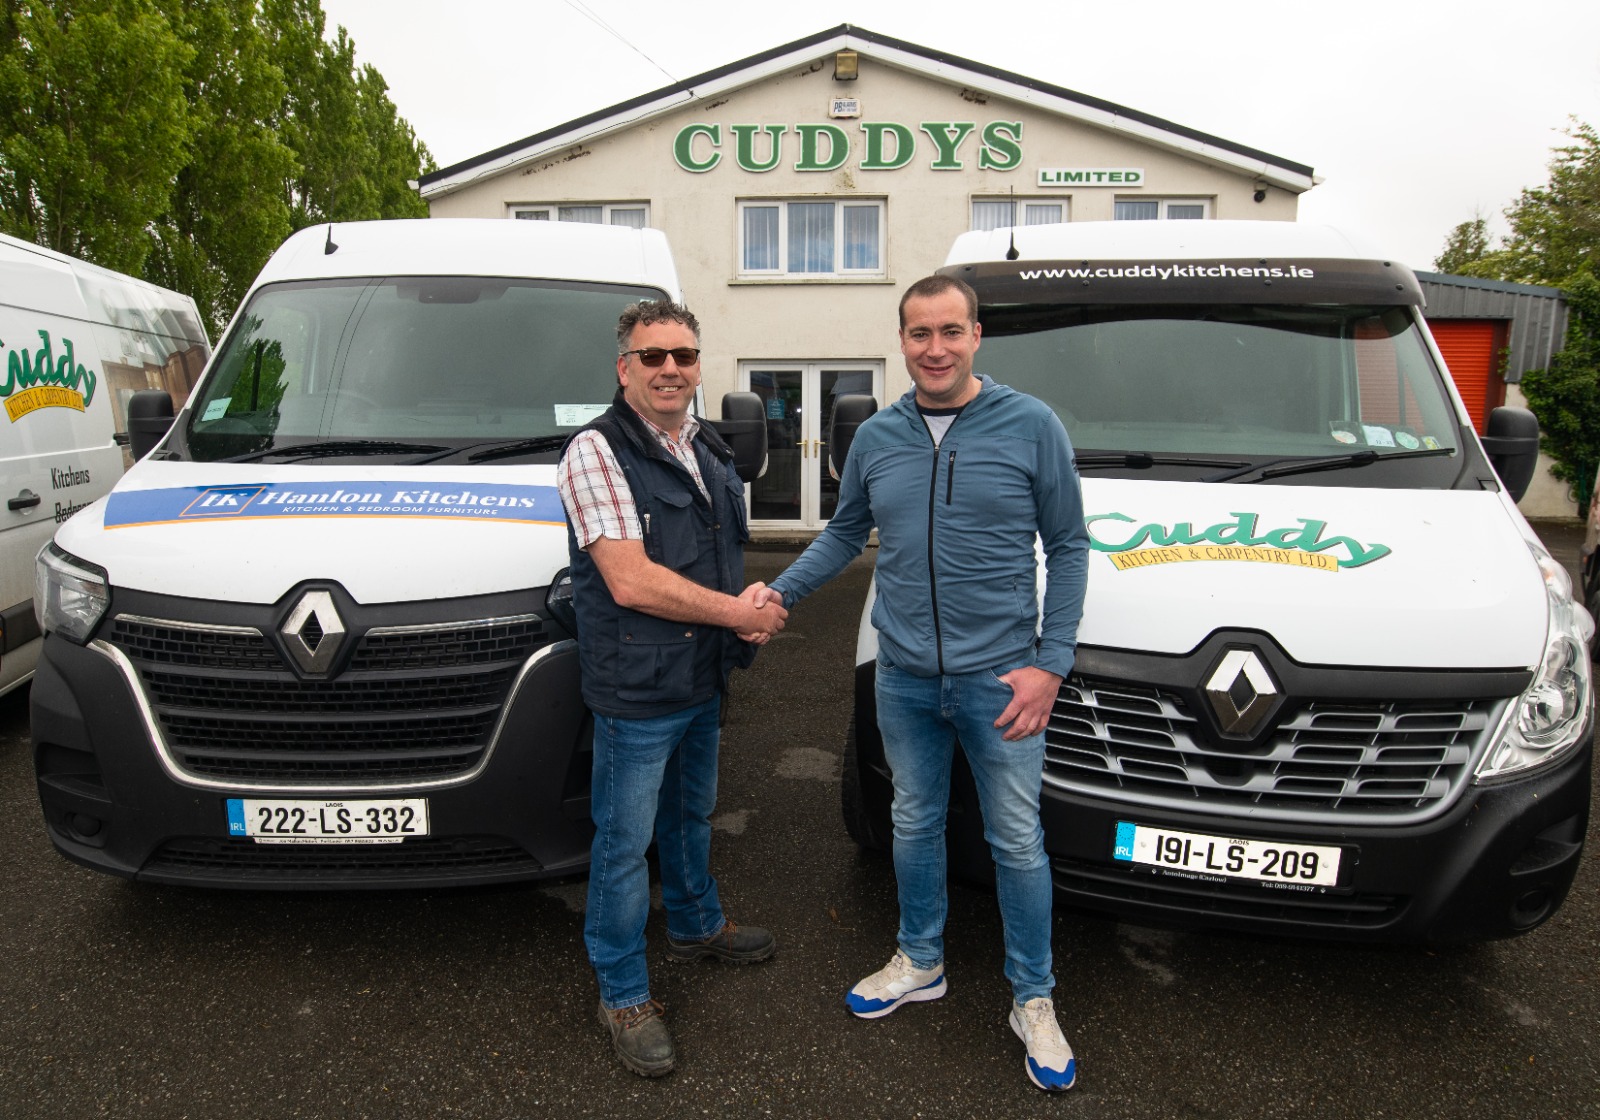 Danny Hanlon, owner of Hanlon Kitchens shakes hands with Declan Cuddy solidifying the acquisition